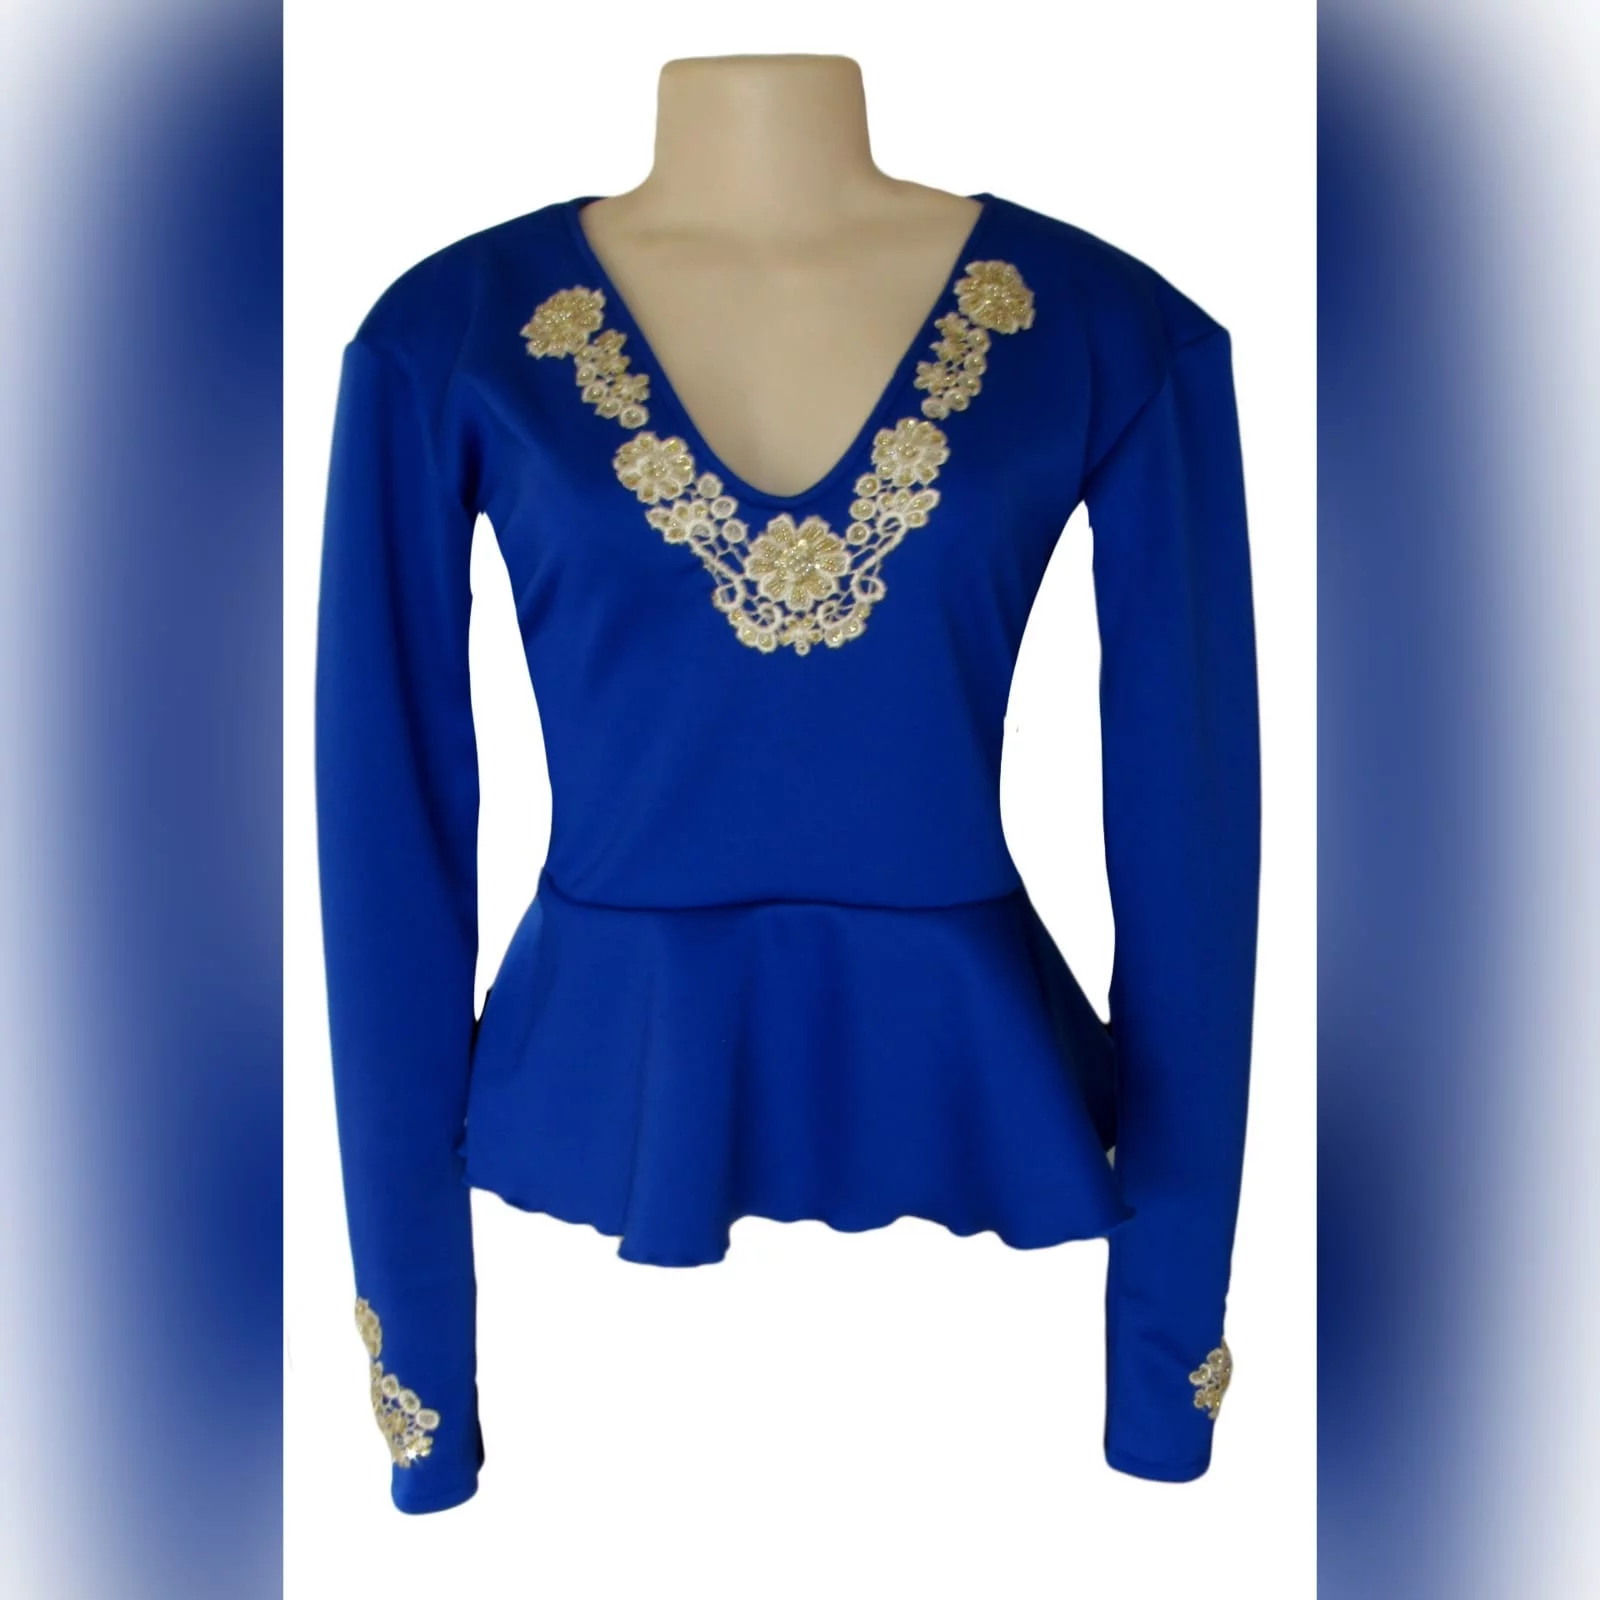 Royal blue & gold peplum smart casual top 1 royal blue & gold peplum smart casual top, long sleeves, v neckline & cuffs detailed with gold beaded lace